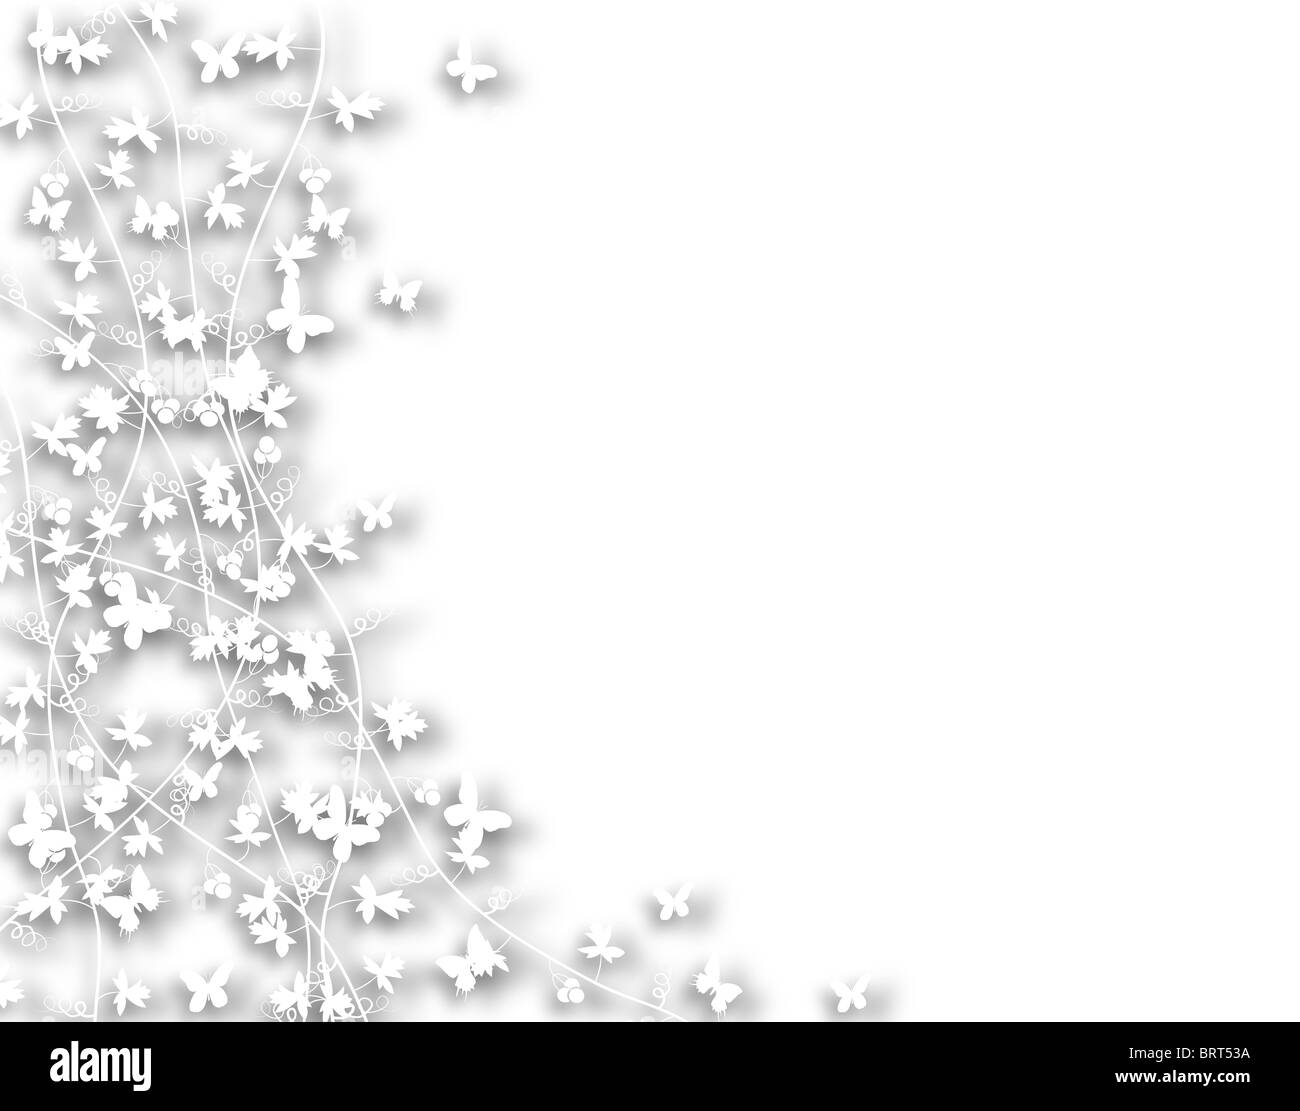 Illustration of white cutout butterflies and vines Stock Photo